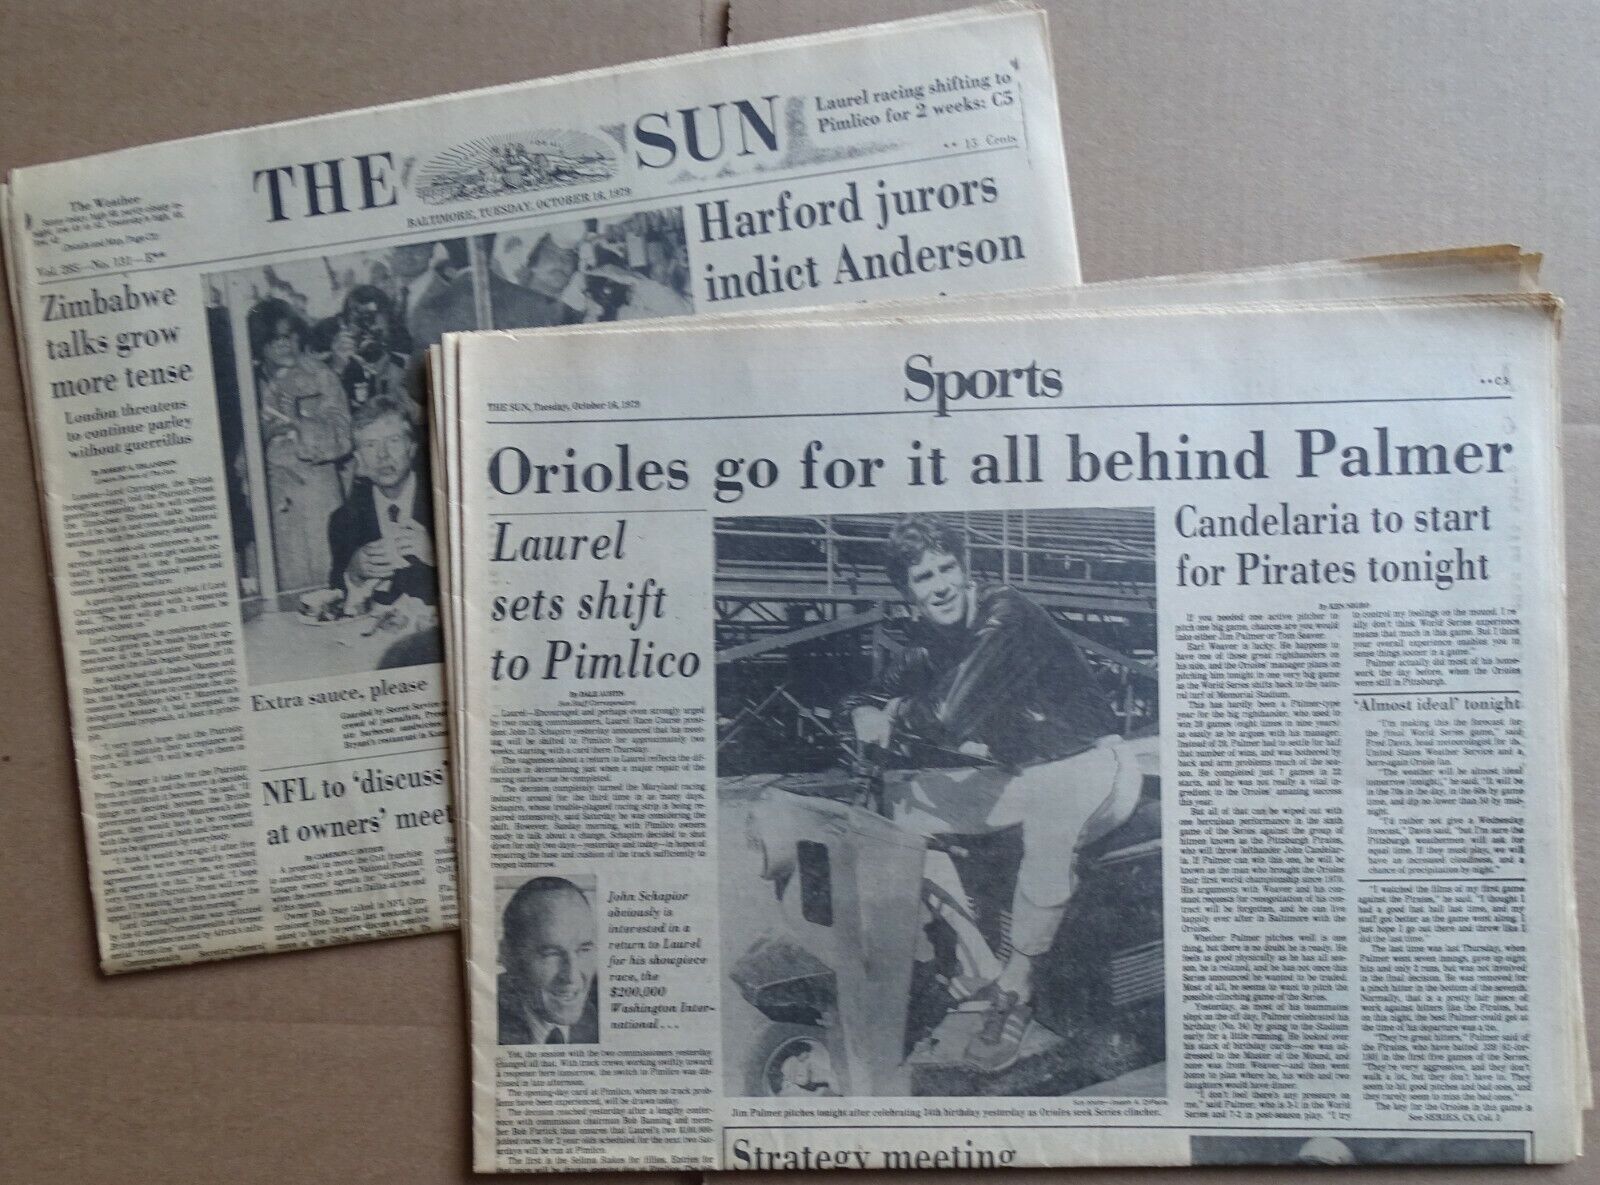 Oct 16 1979 Baltimore Sun ORIOLES GO FOR IT ALL BEHIND PALMER 